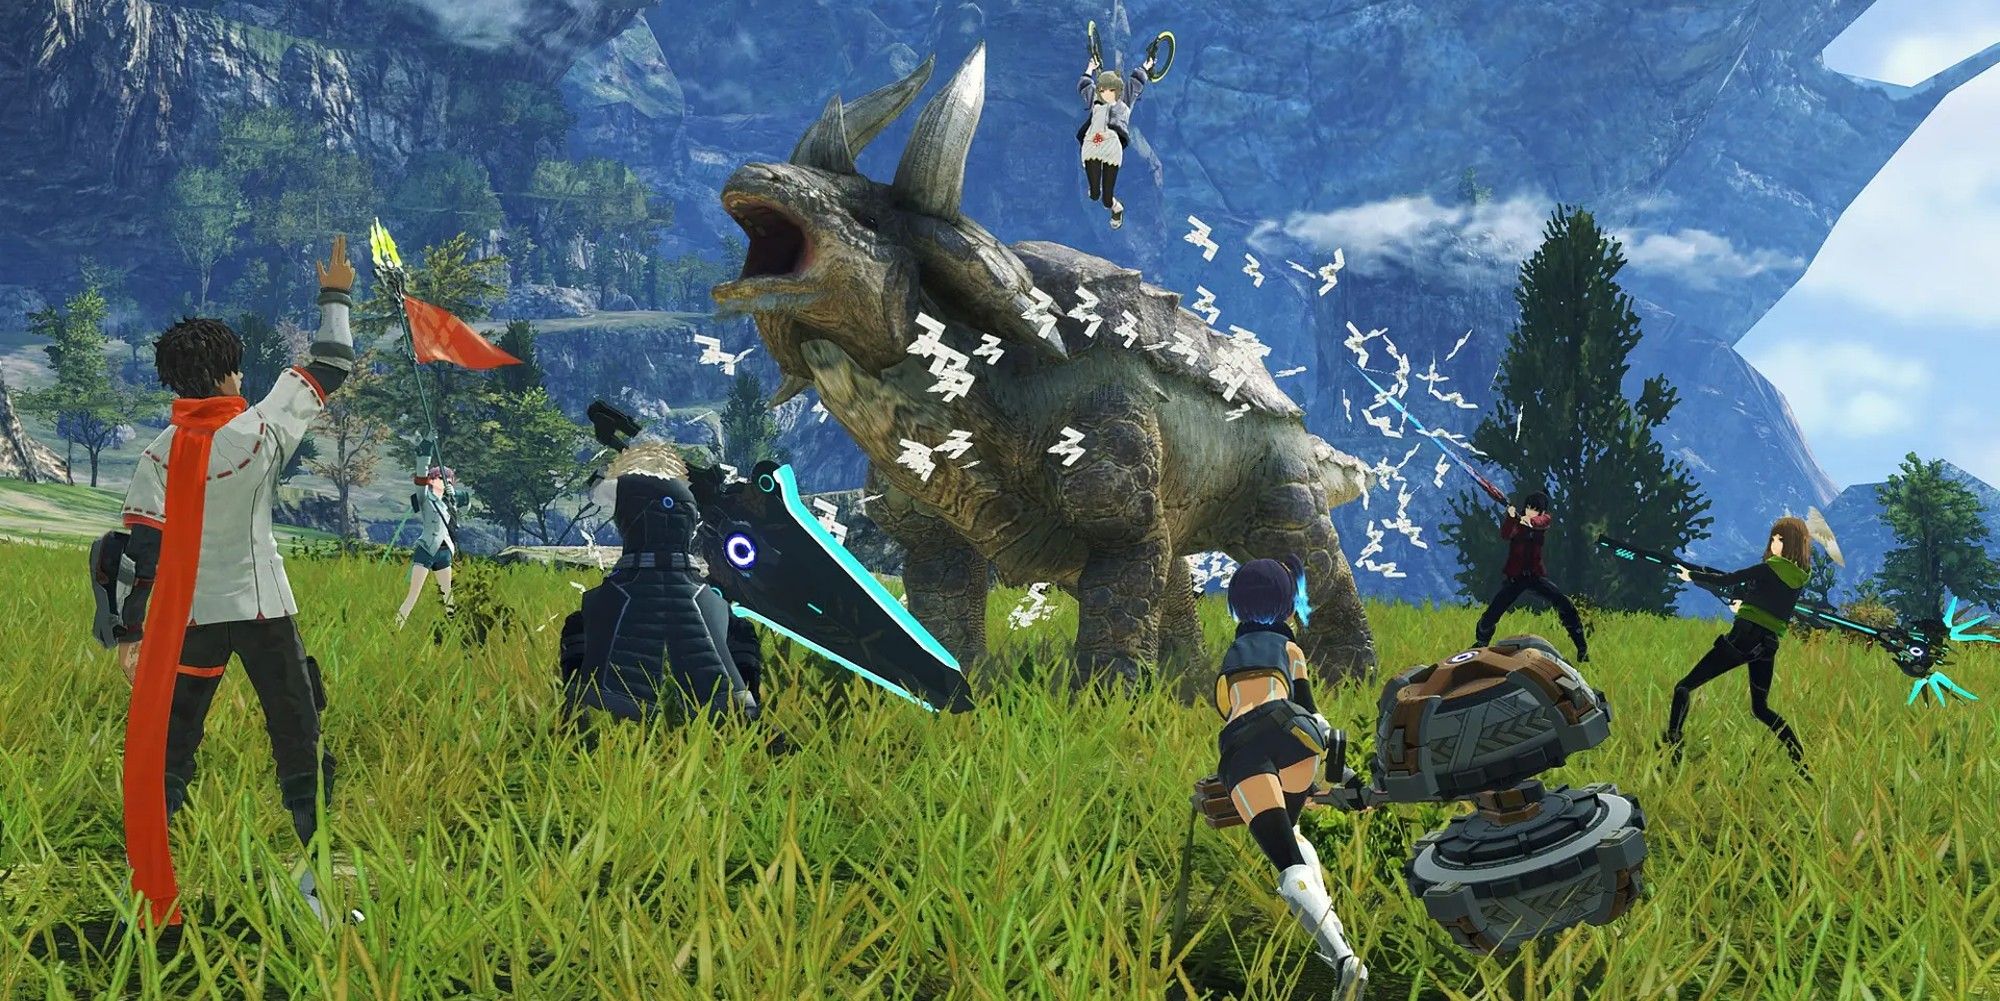 A screenshot from Xenoblade Chronicles 3, showing the party battling a dinosaur-like creature in a green field